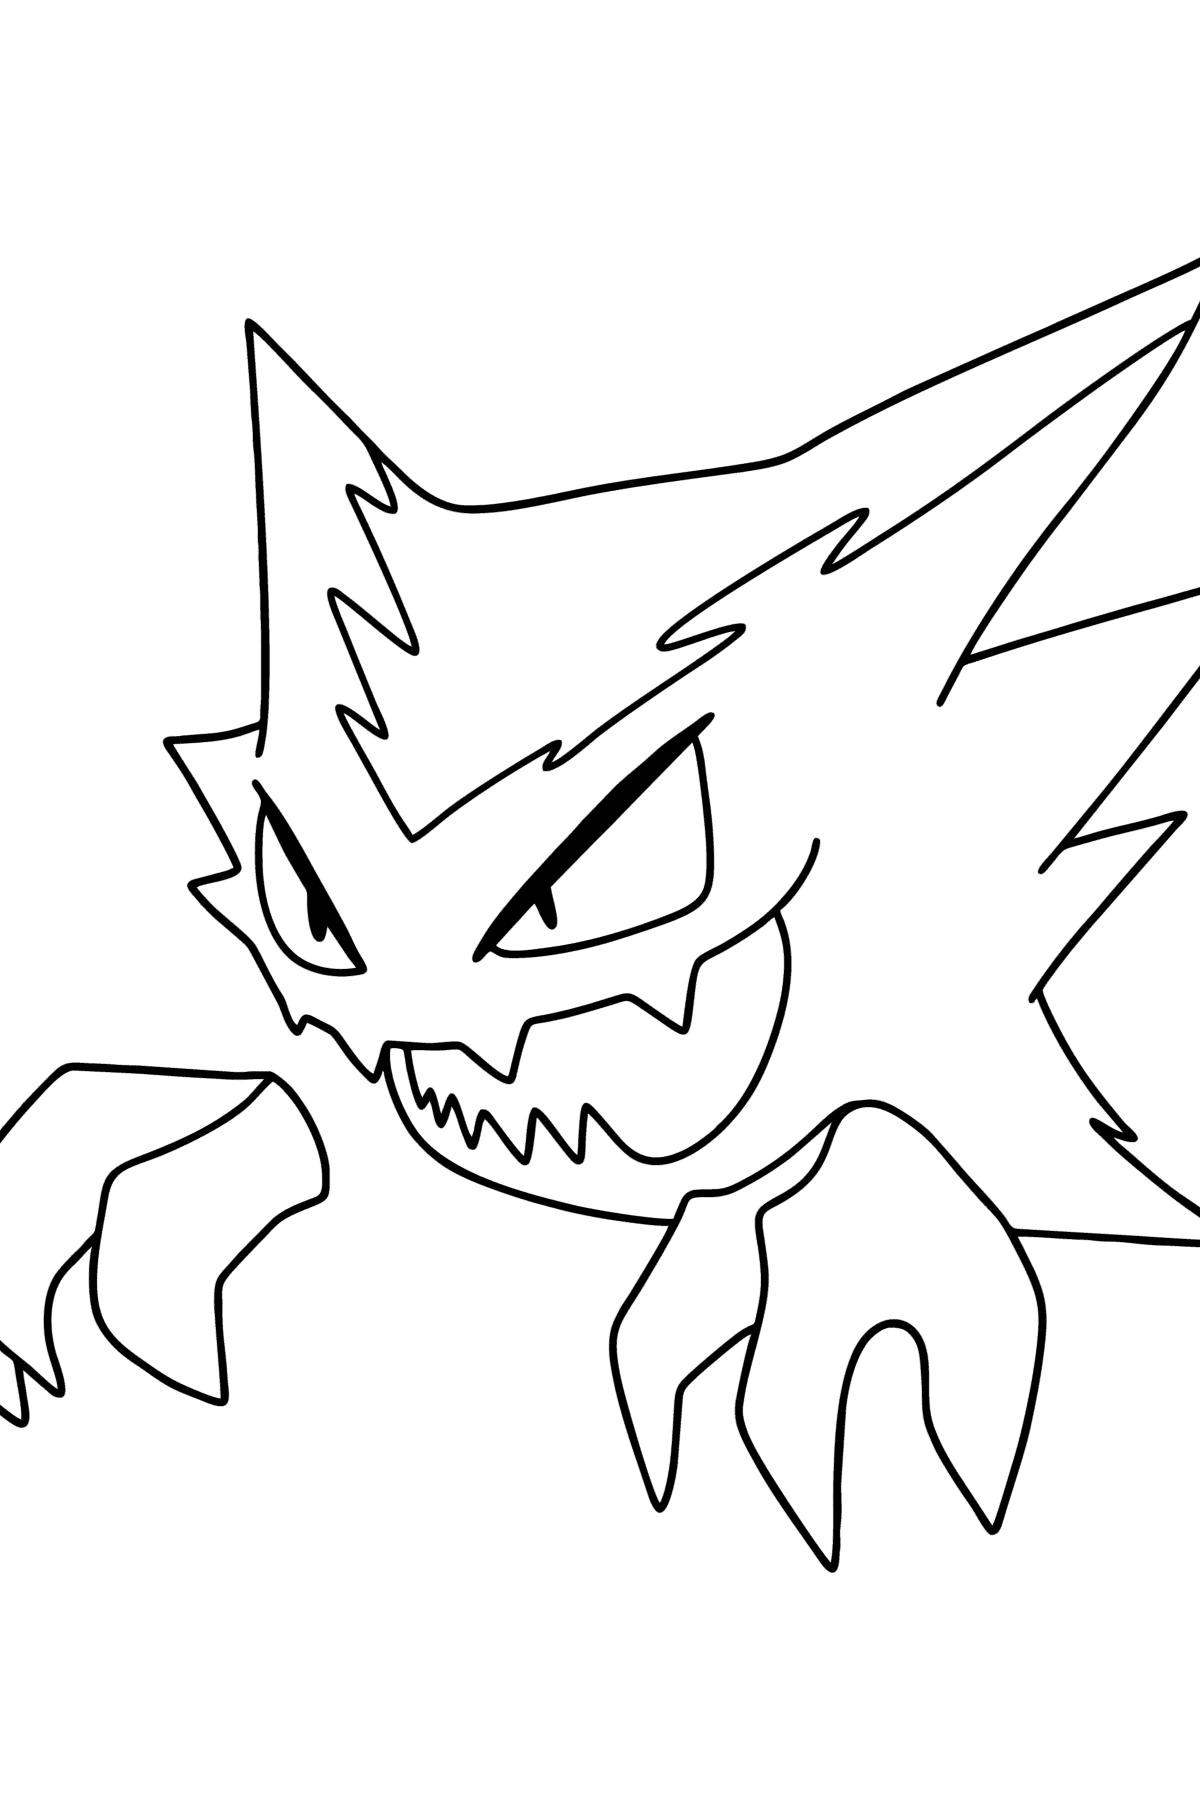 Pokémon Go Haunter coloring page - Coloring Pages for Kids